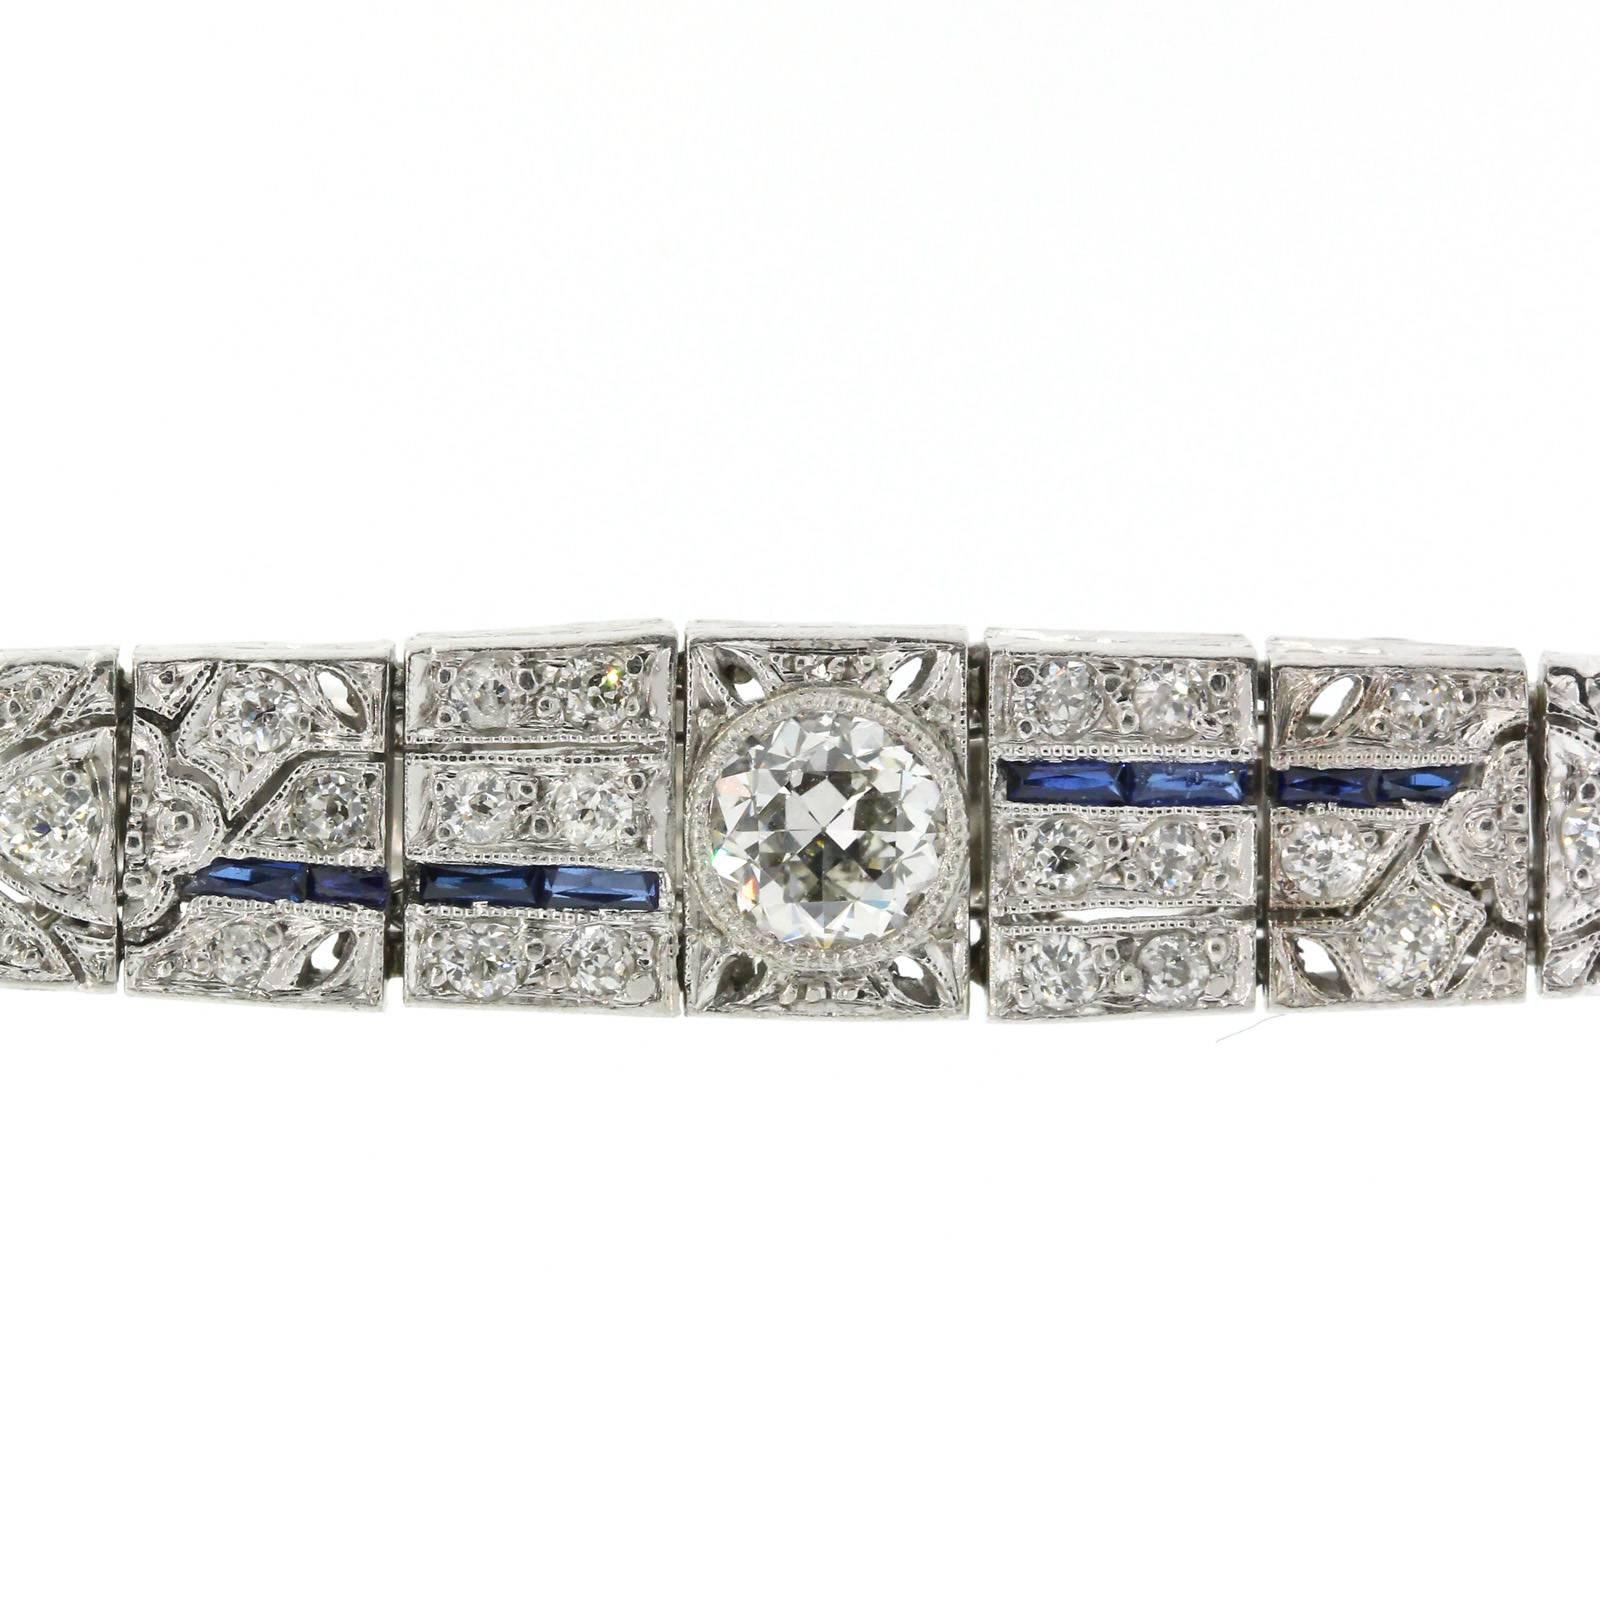 Coveted tapered Art Deco bracelet of box designed links and open work, featuring a bezel set Old Cut Diamond in center, and flashing over three carats of Old European Cut Diamonds. The delicate design work is accented with original synthetic